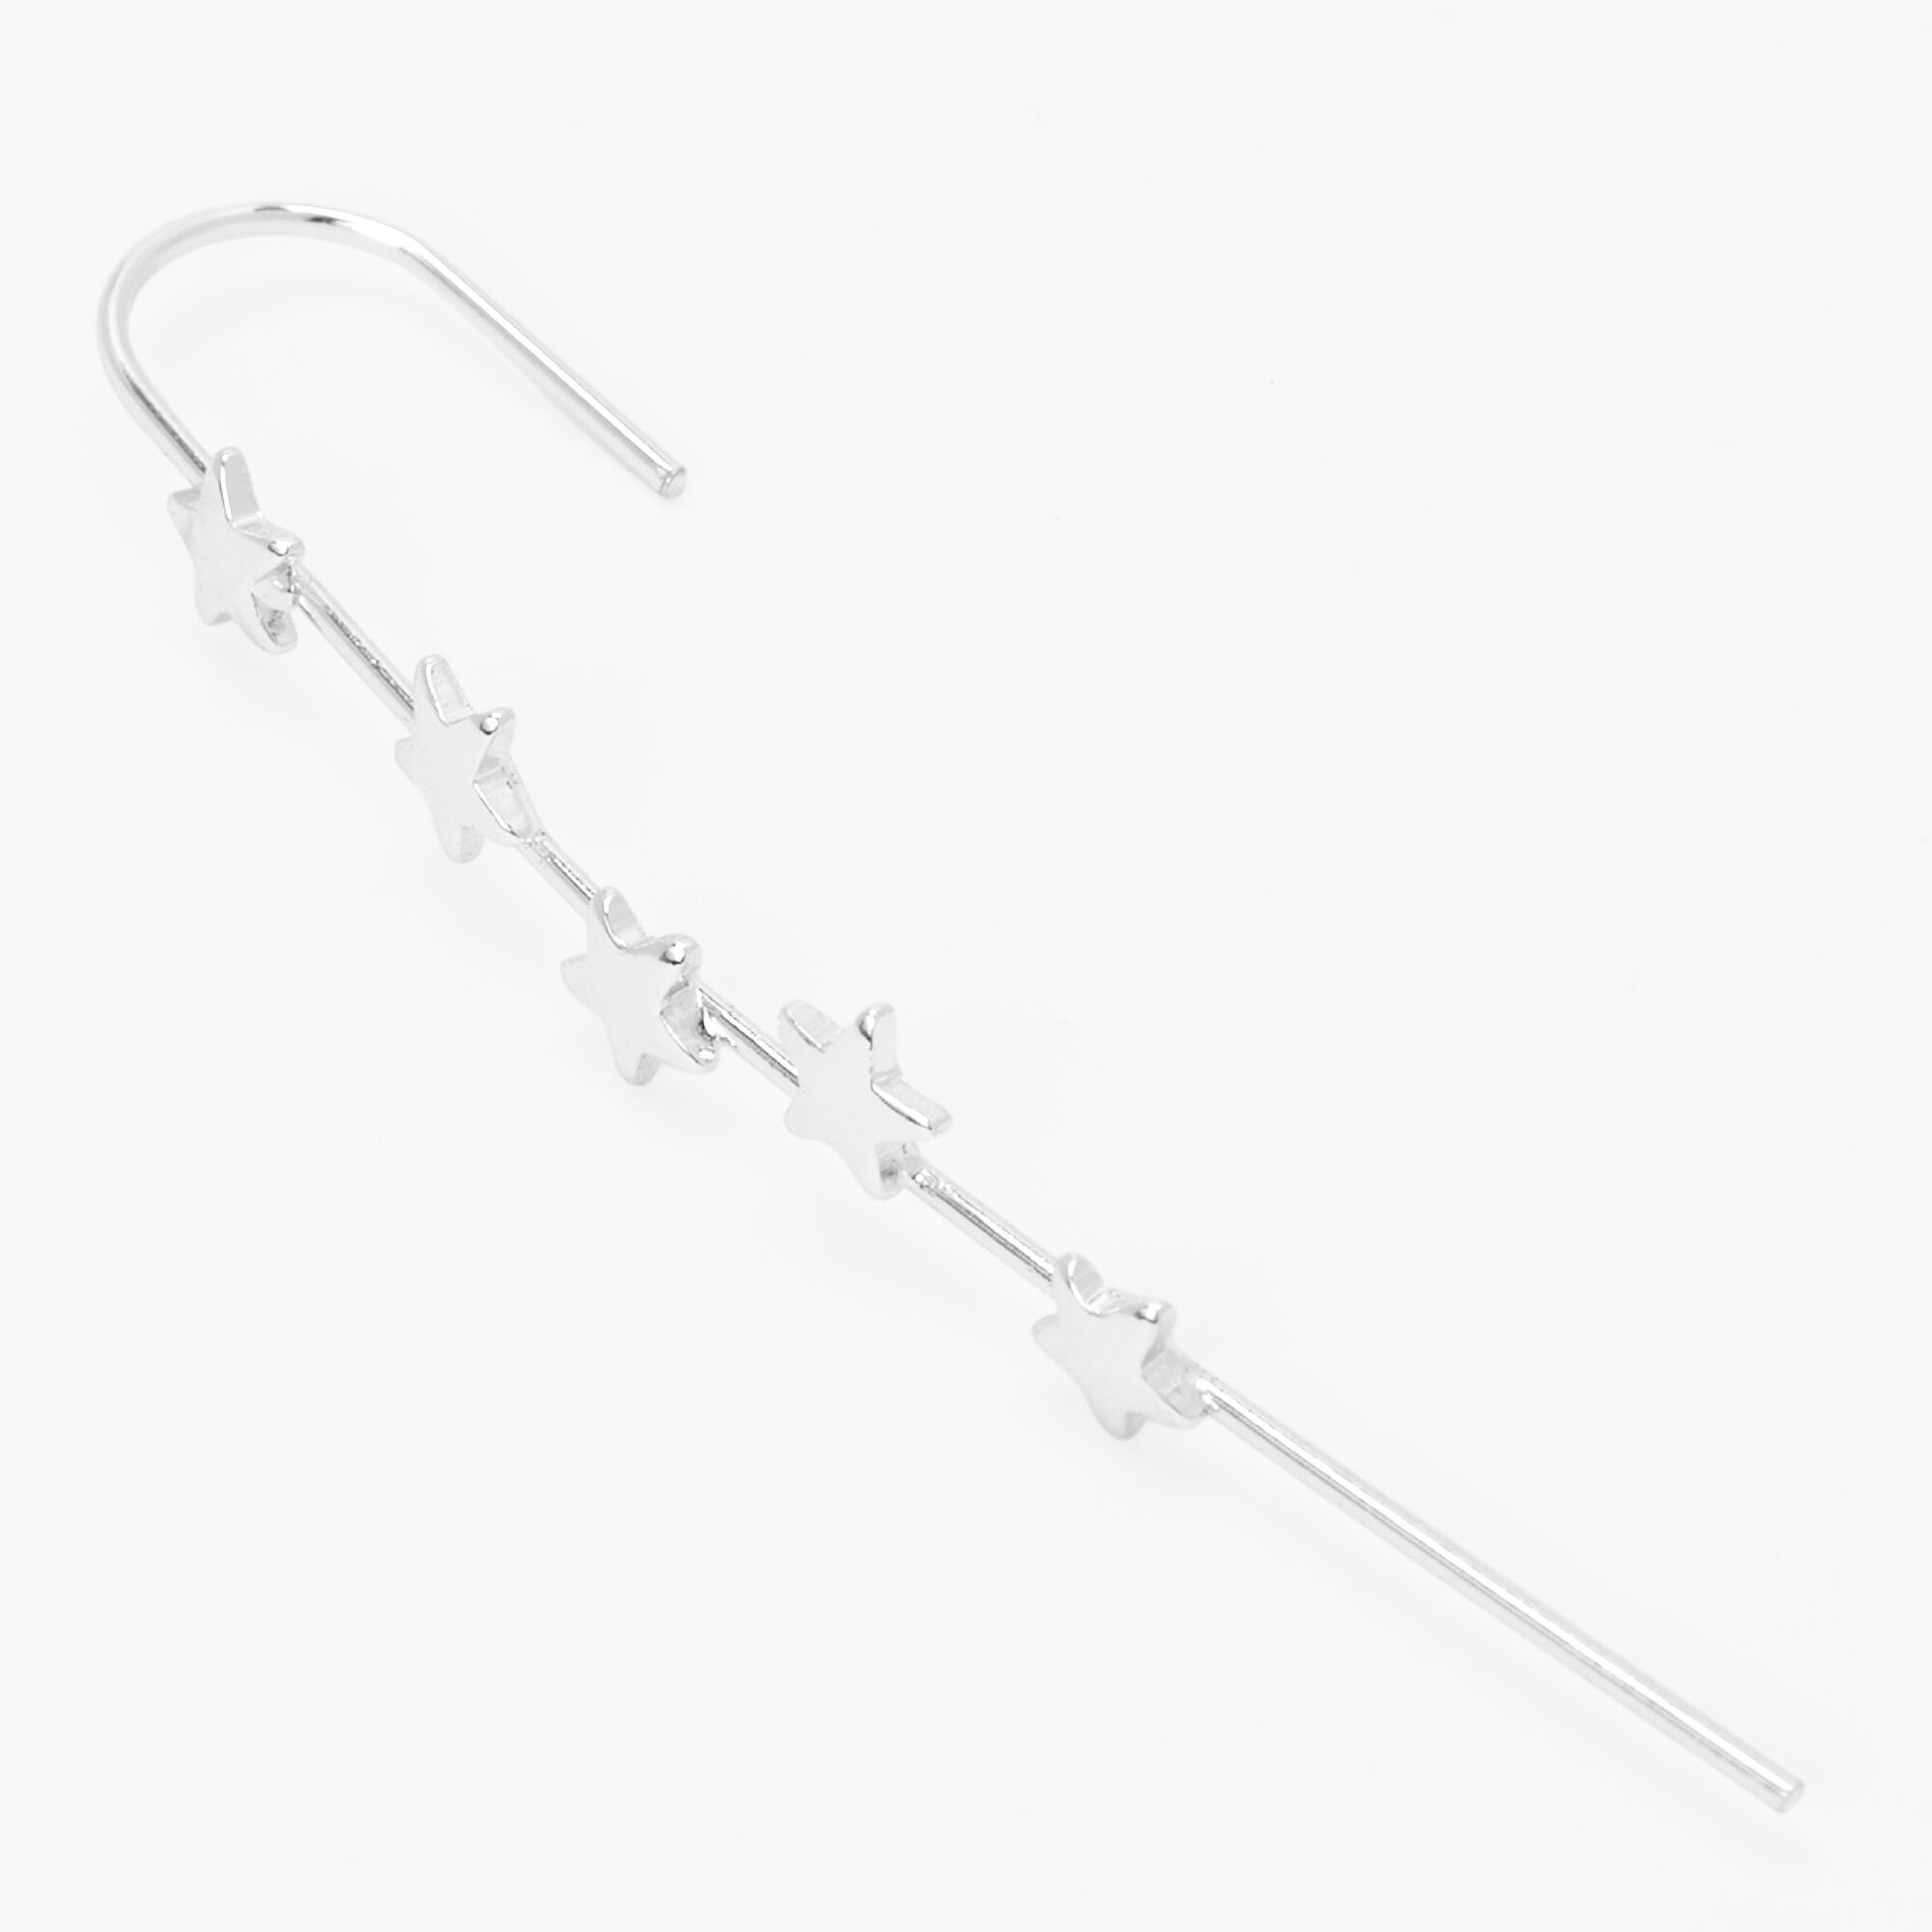 View Claires Tone Star Ear Cuff Pin Silver information